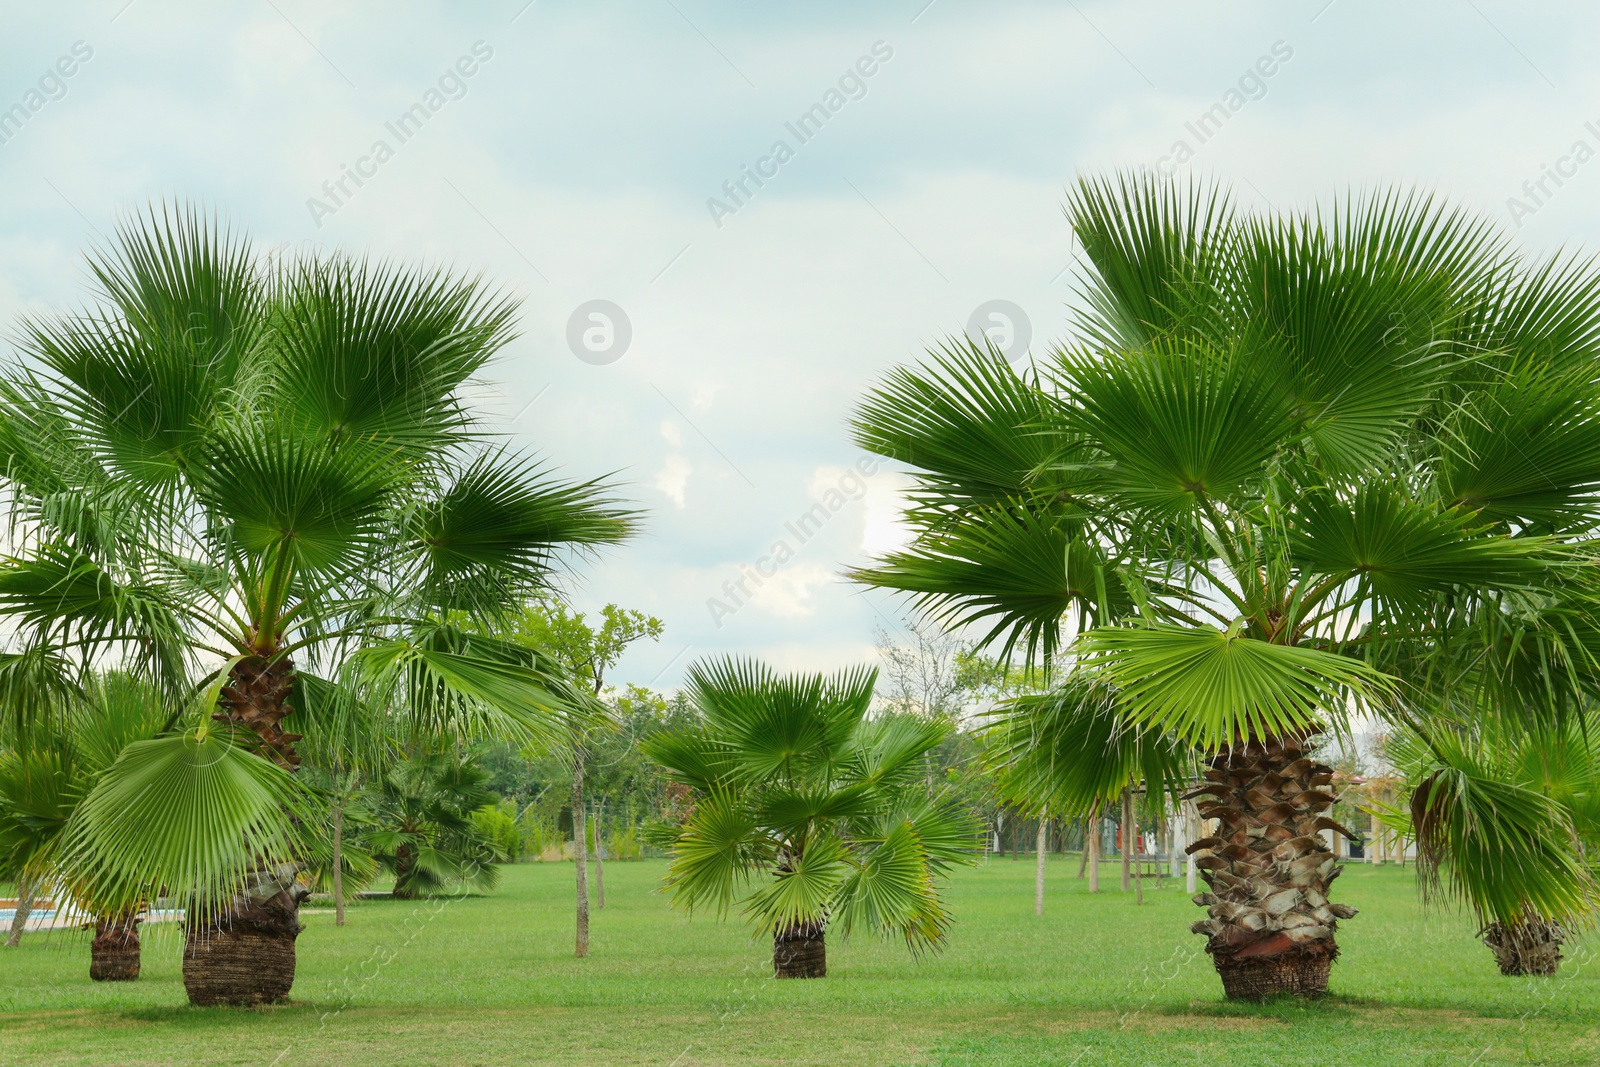 Photo of Tropical palm trees with beautiful green leaves outdoors